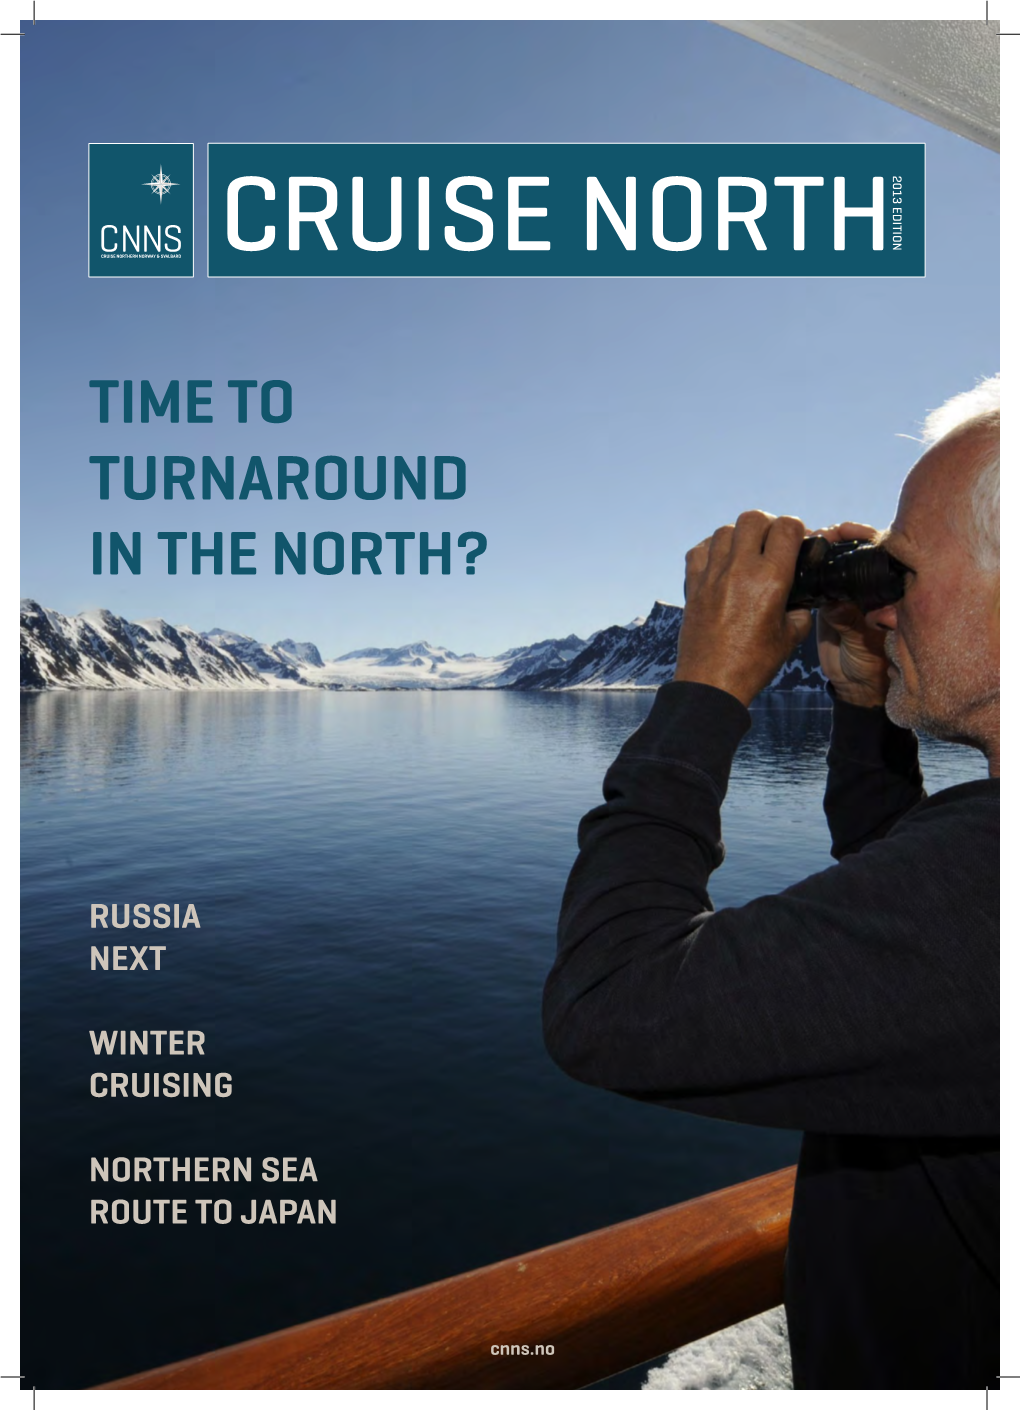 Cruice North 2013 Magasin.Indd